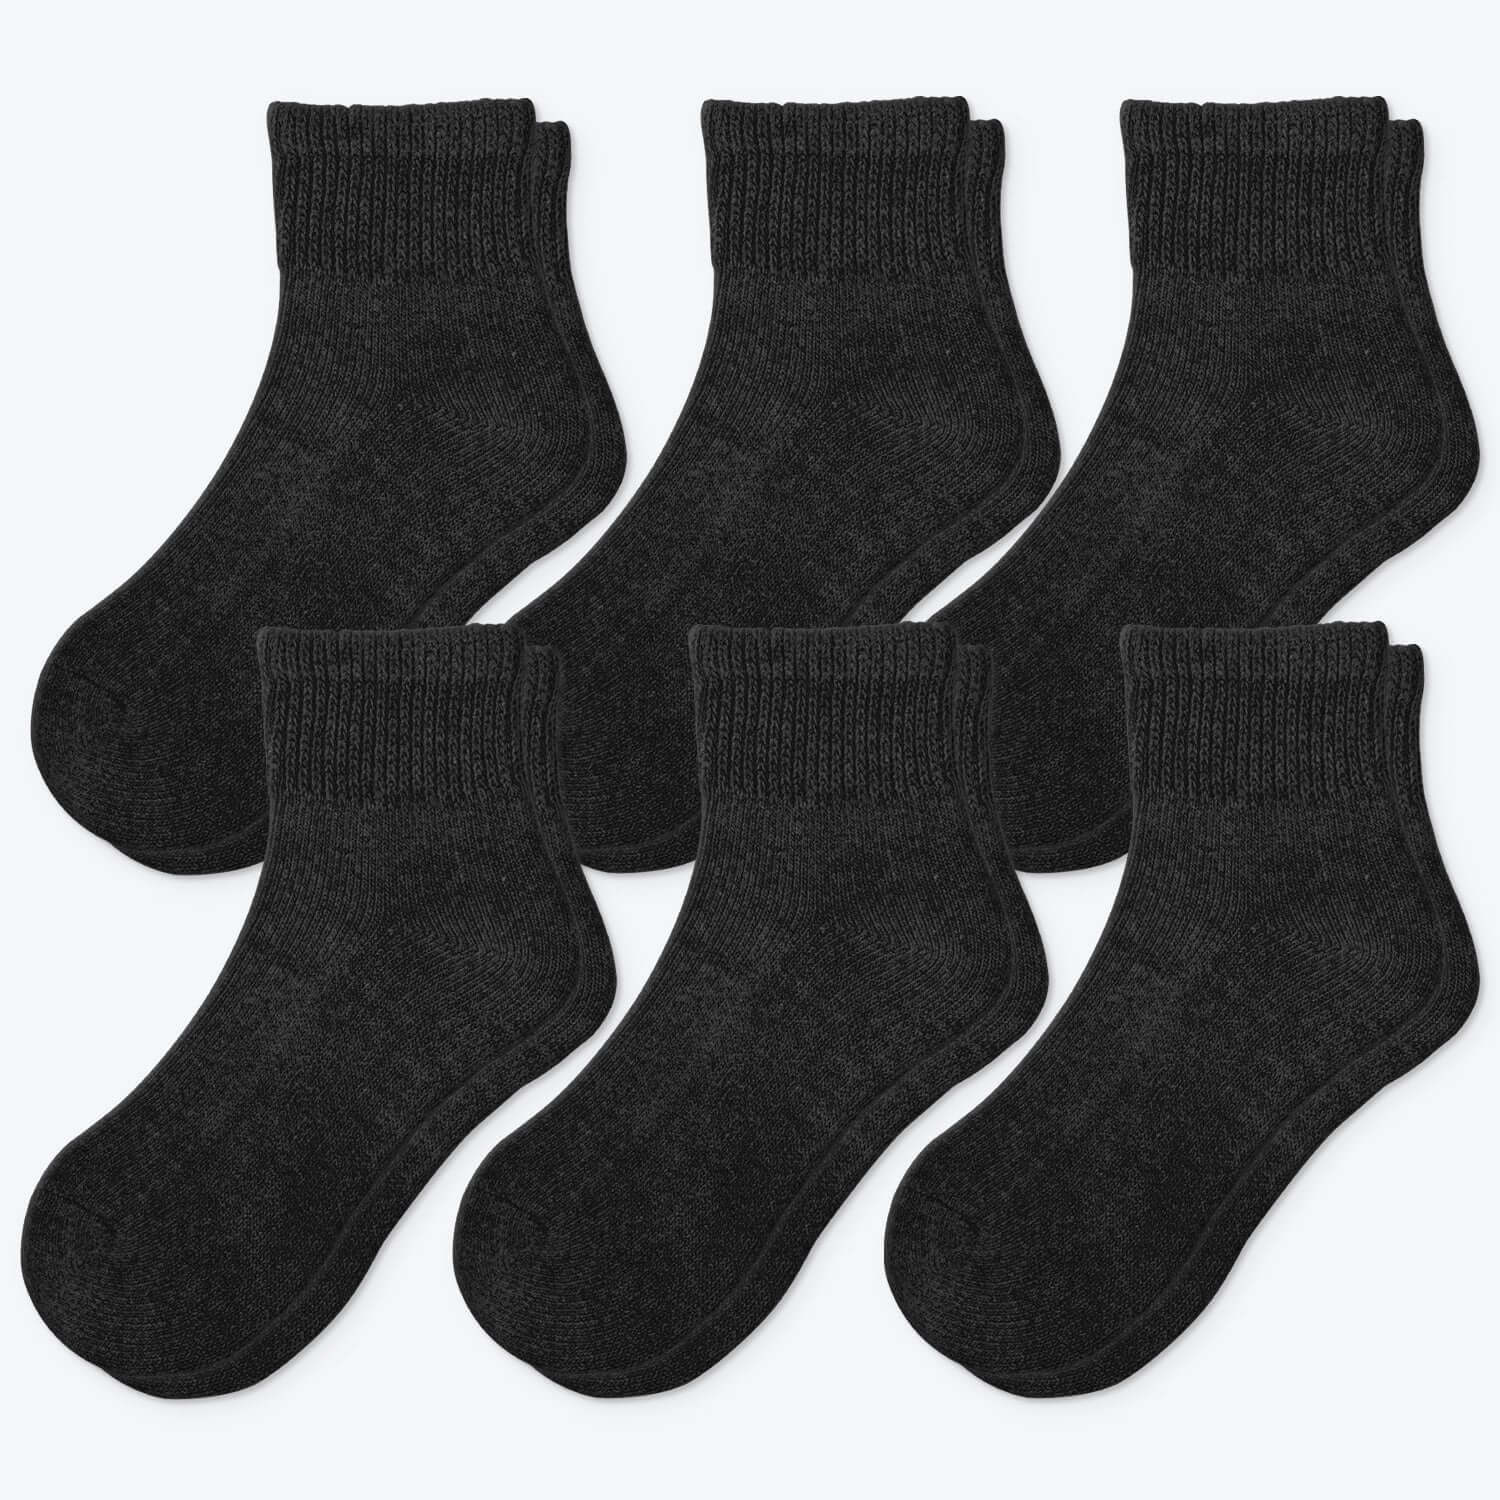 Extra wide diabetic ankle socks, warm & thick cushion sole, 6 pairs - md-diab